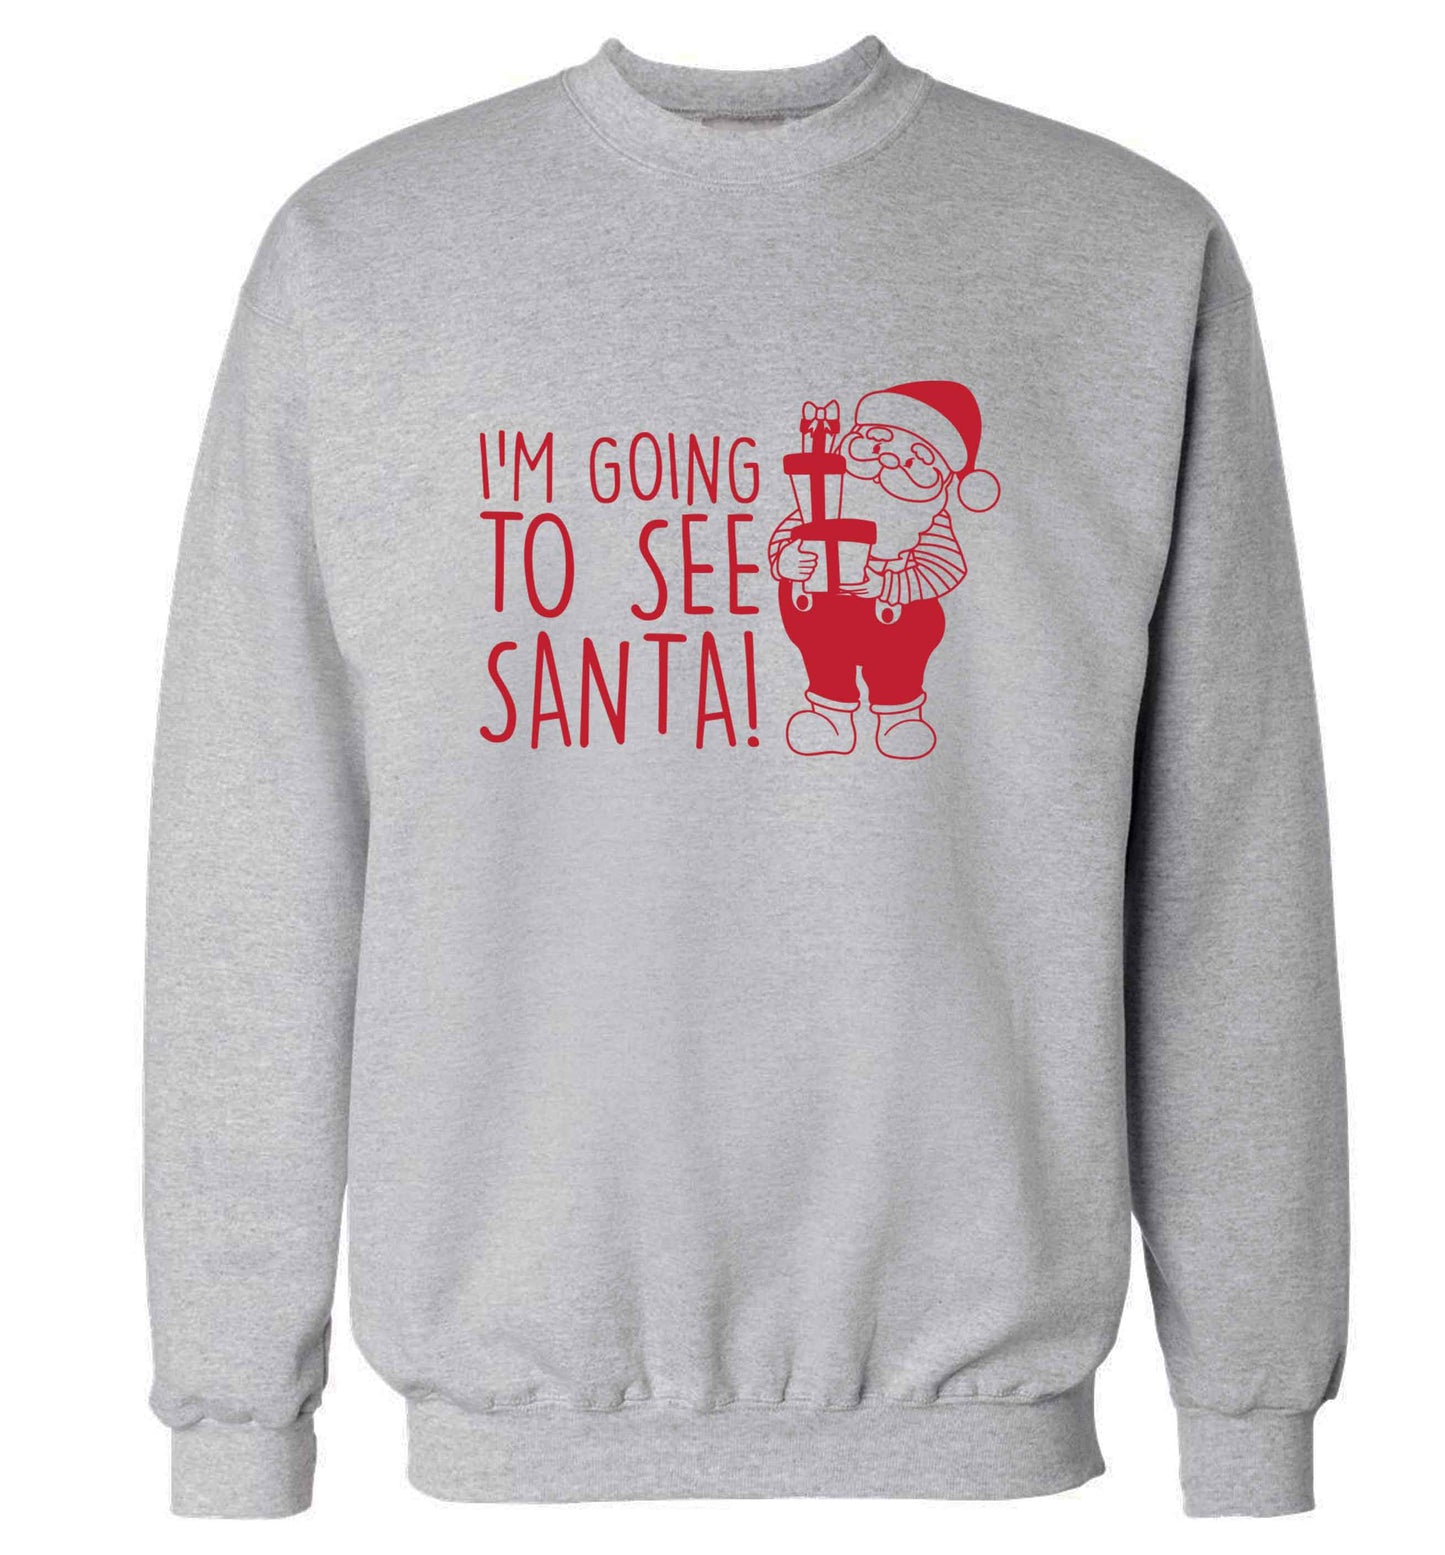 Merry Christmas adult's unisex grey sweater 2XL